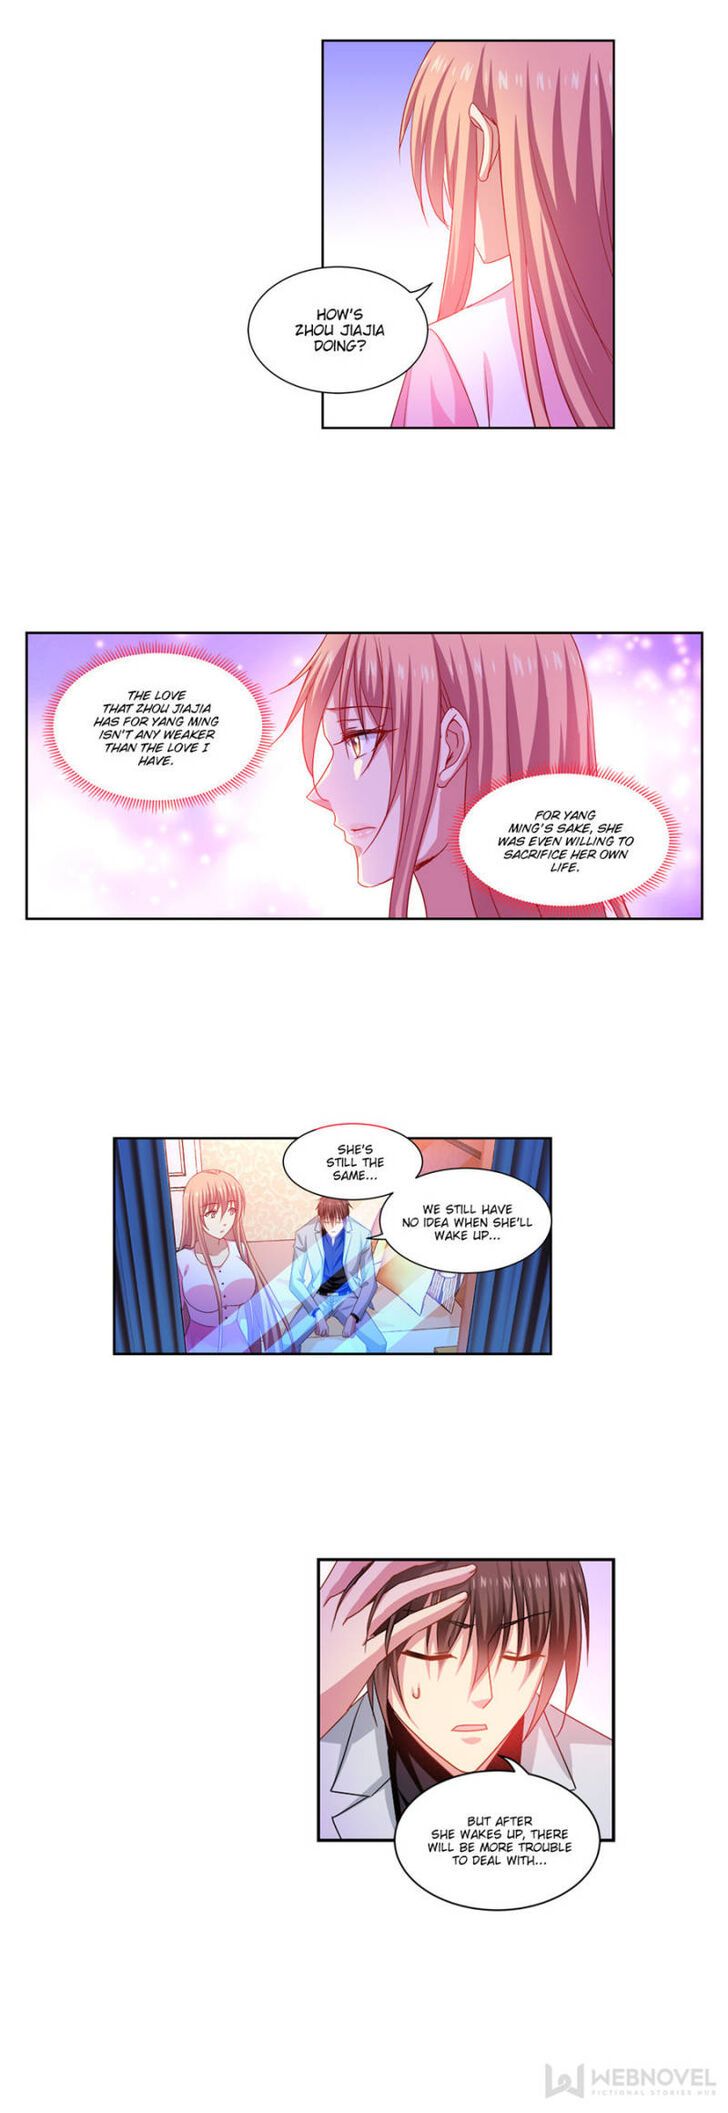 So Pure, So Flirtatious ( Very Pure ) Chapter 260 page 6